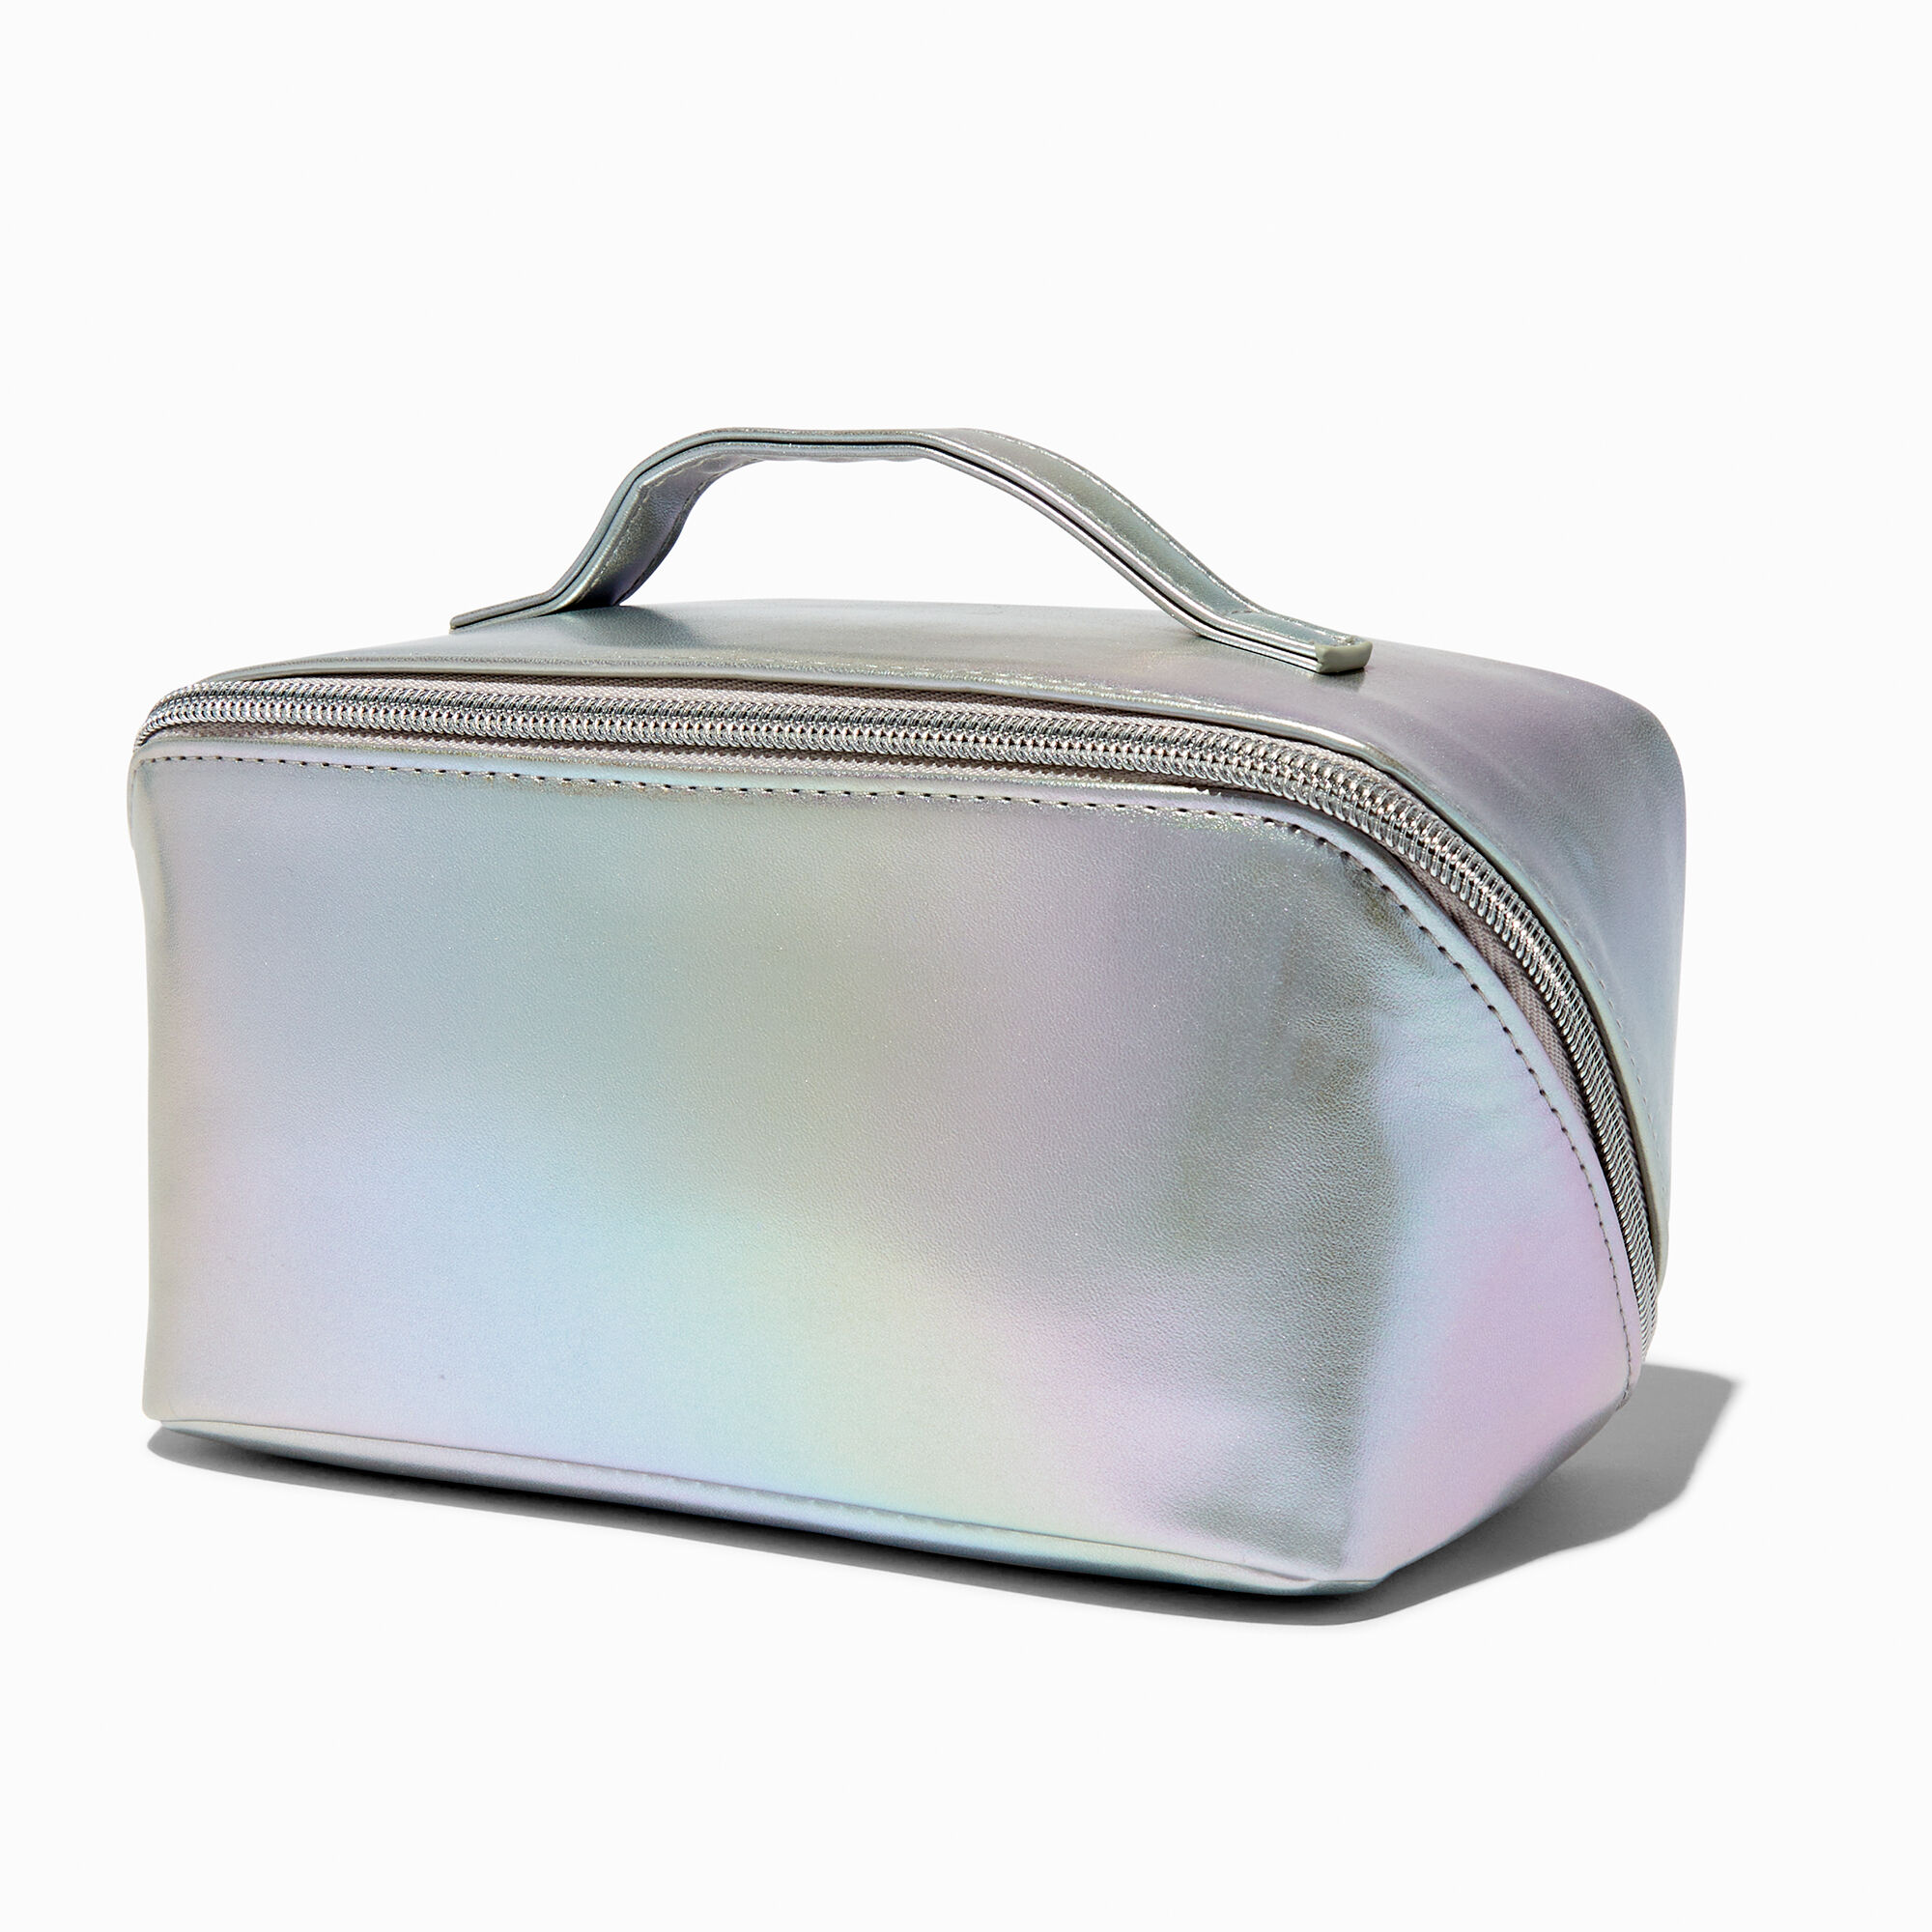 View Claires Flat Ab Makeup Bag Silver information